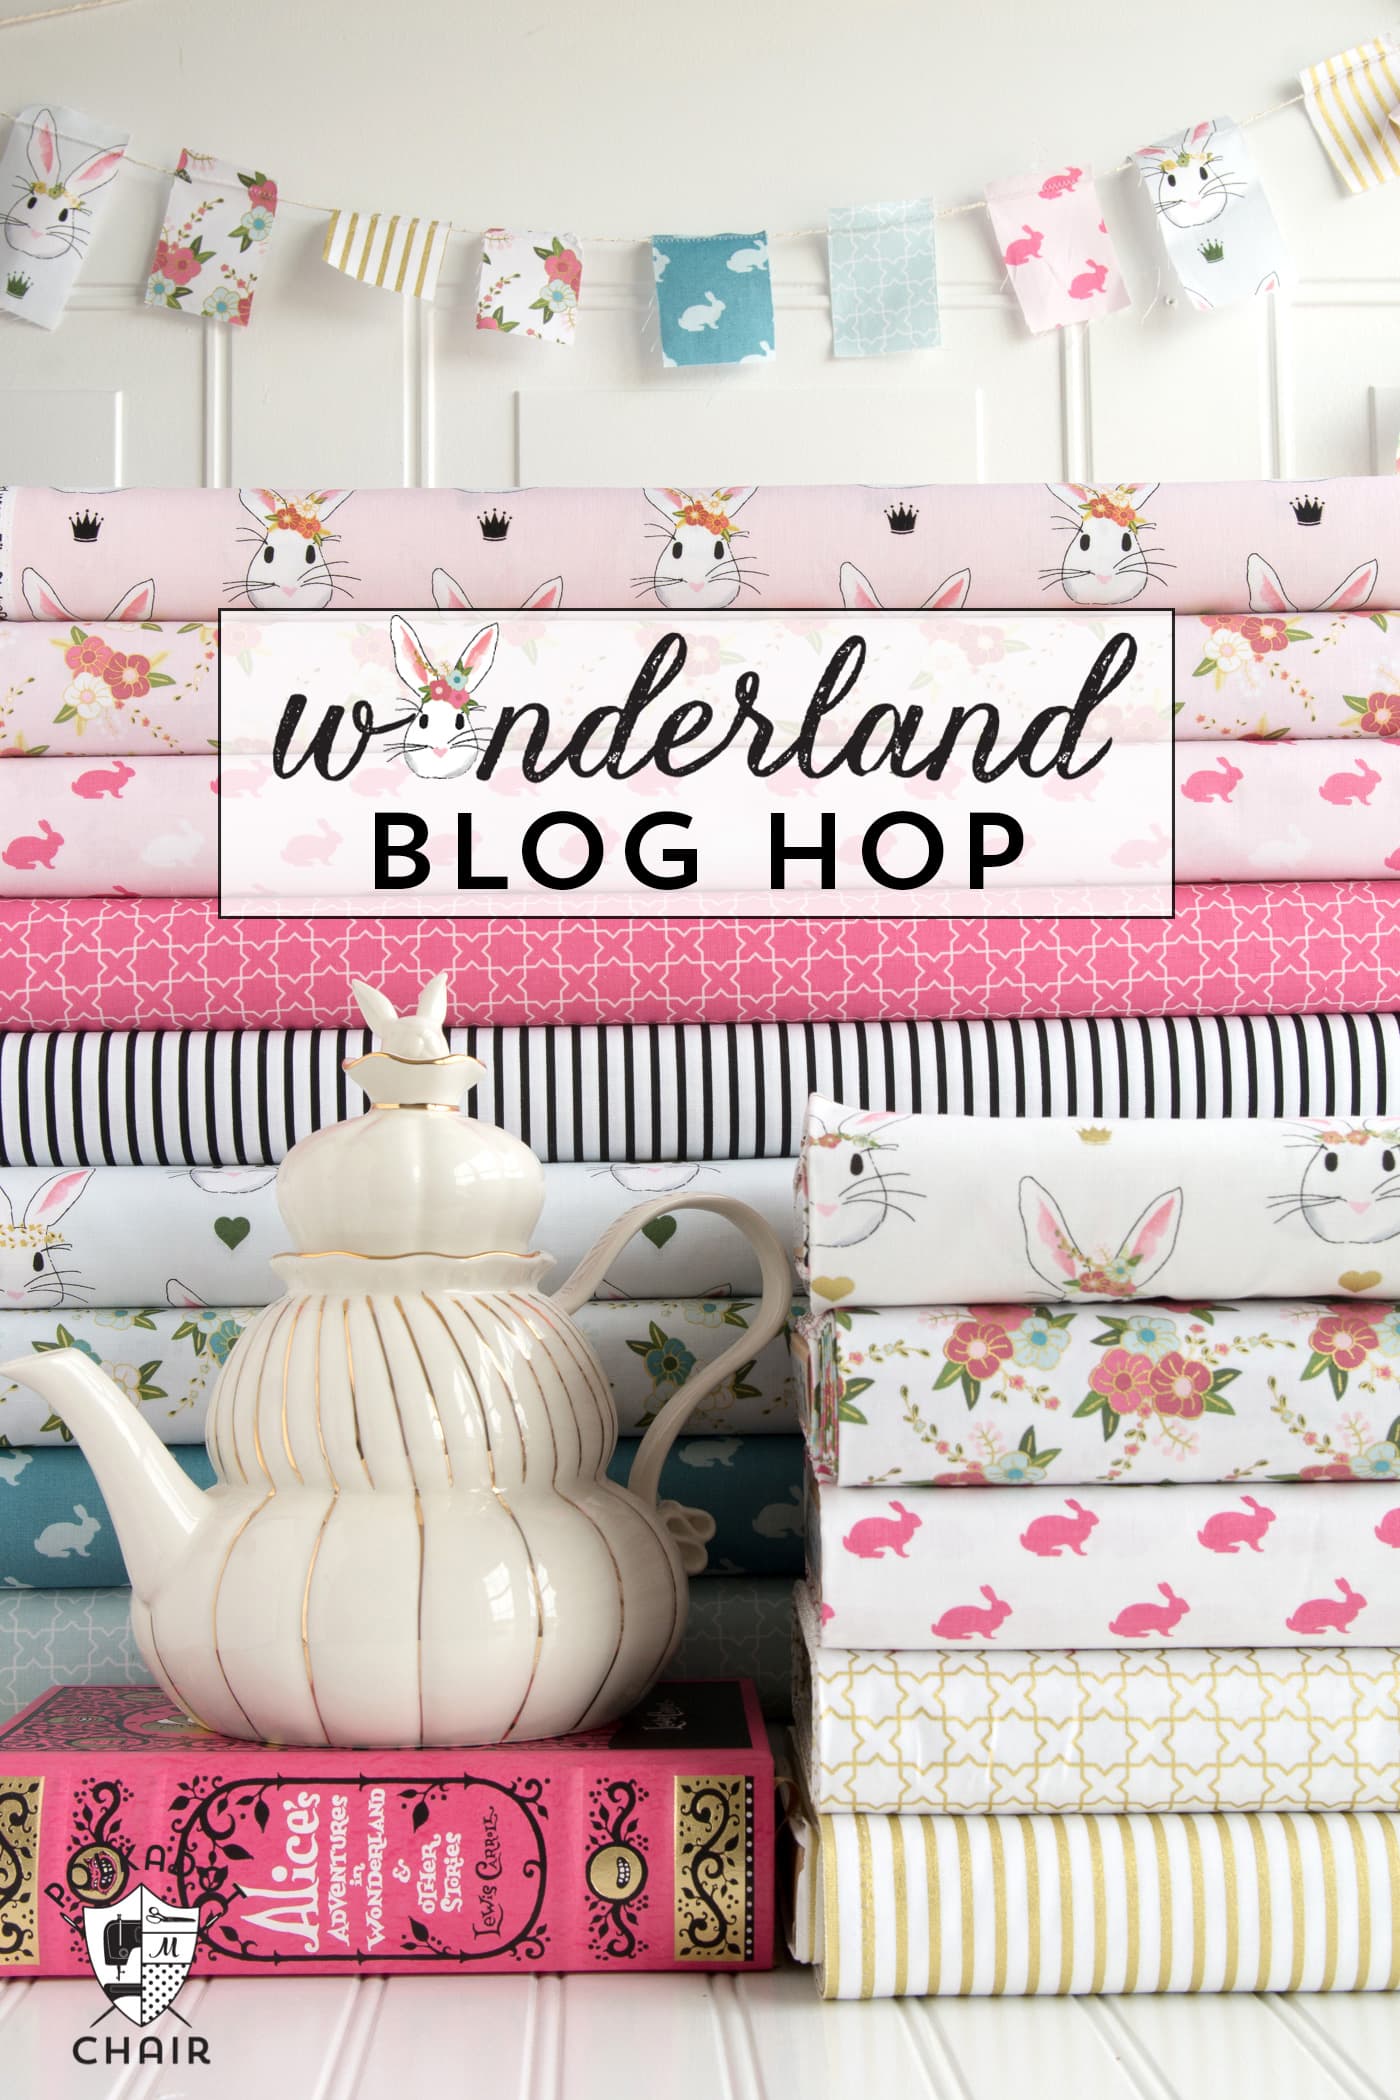 A blog tour full of great ideas using Wonderland Fabric. Sewing patterns, projects and craft ideas for Spring and Easter!